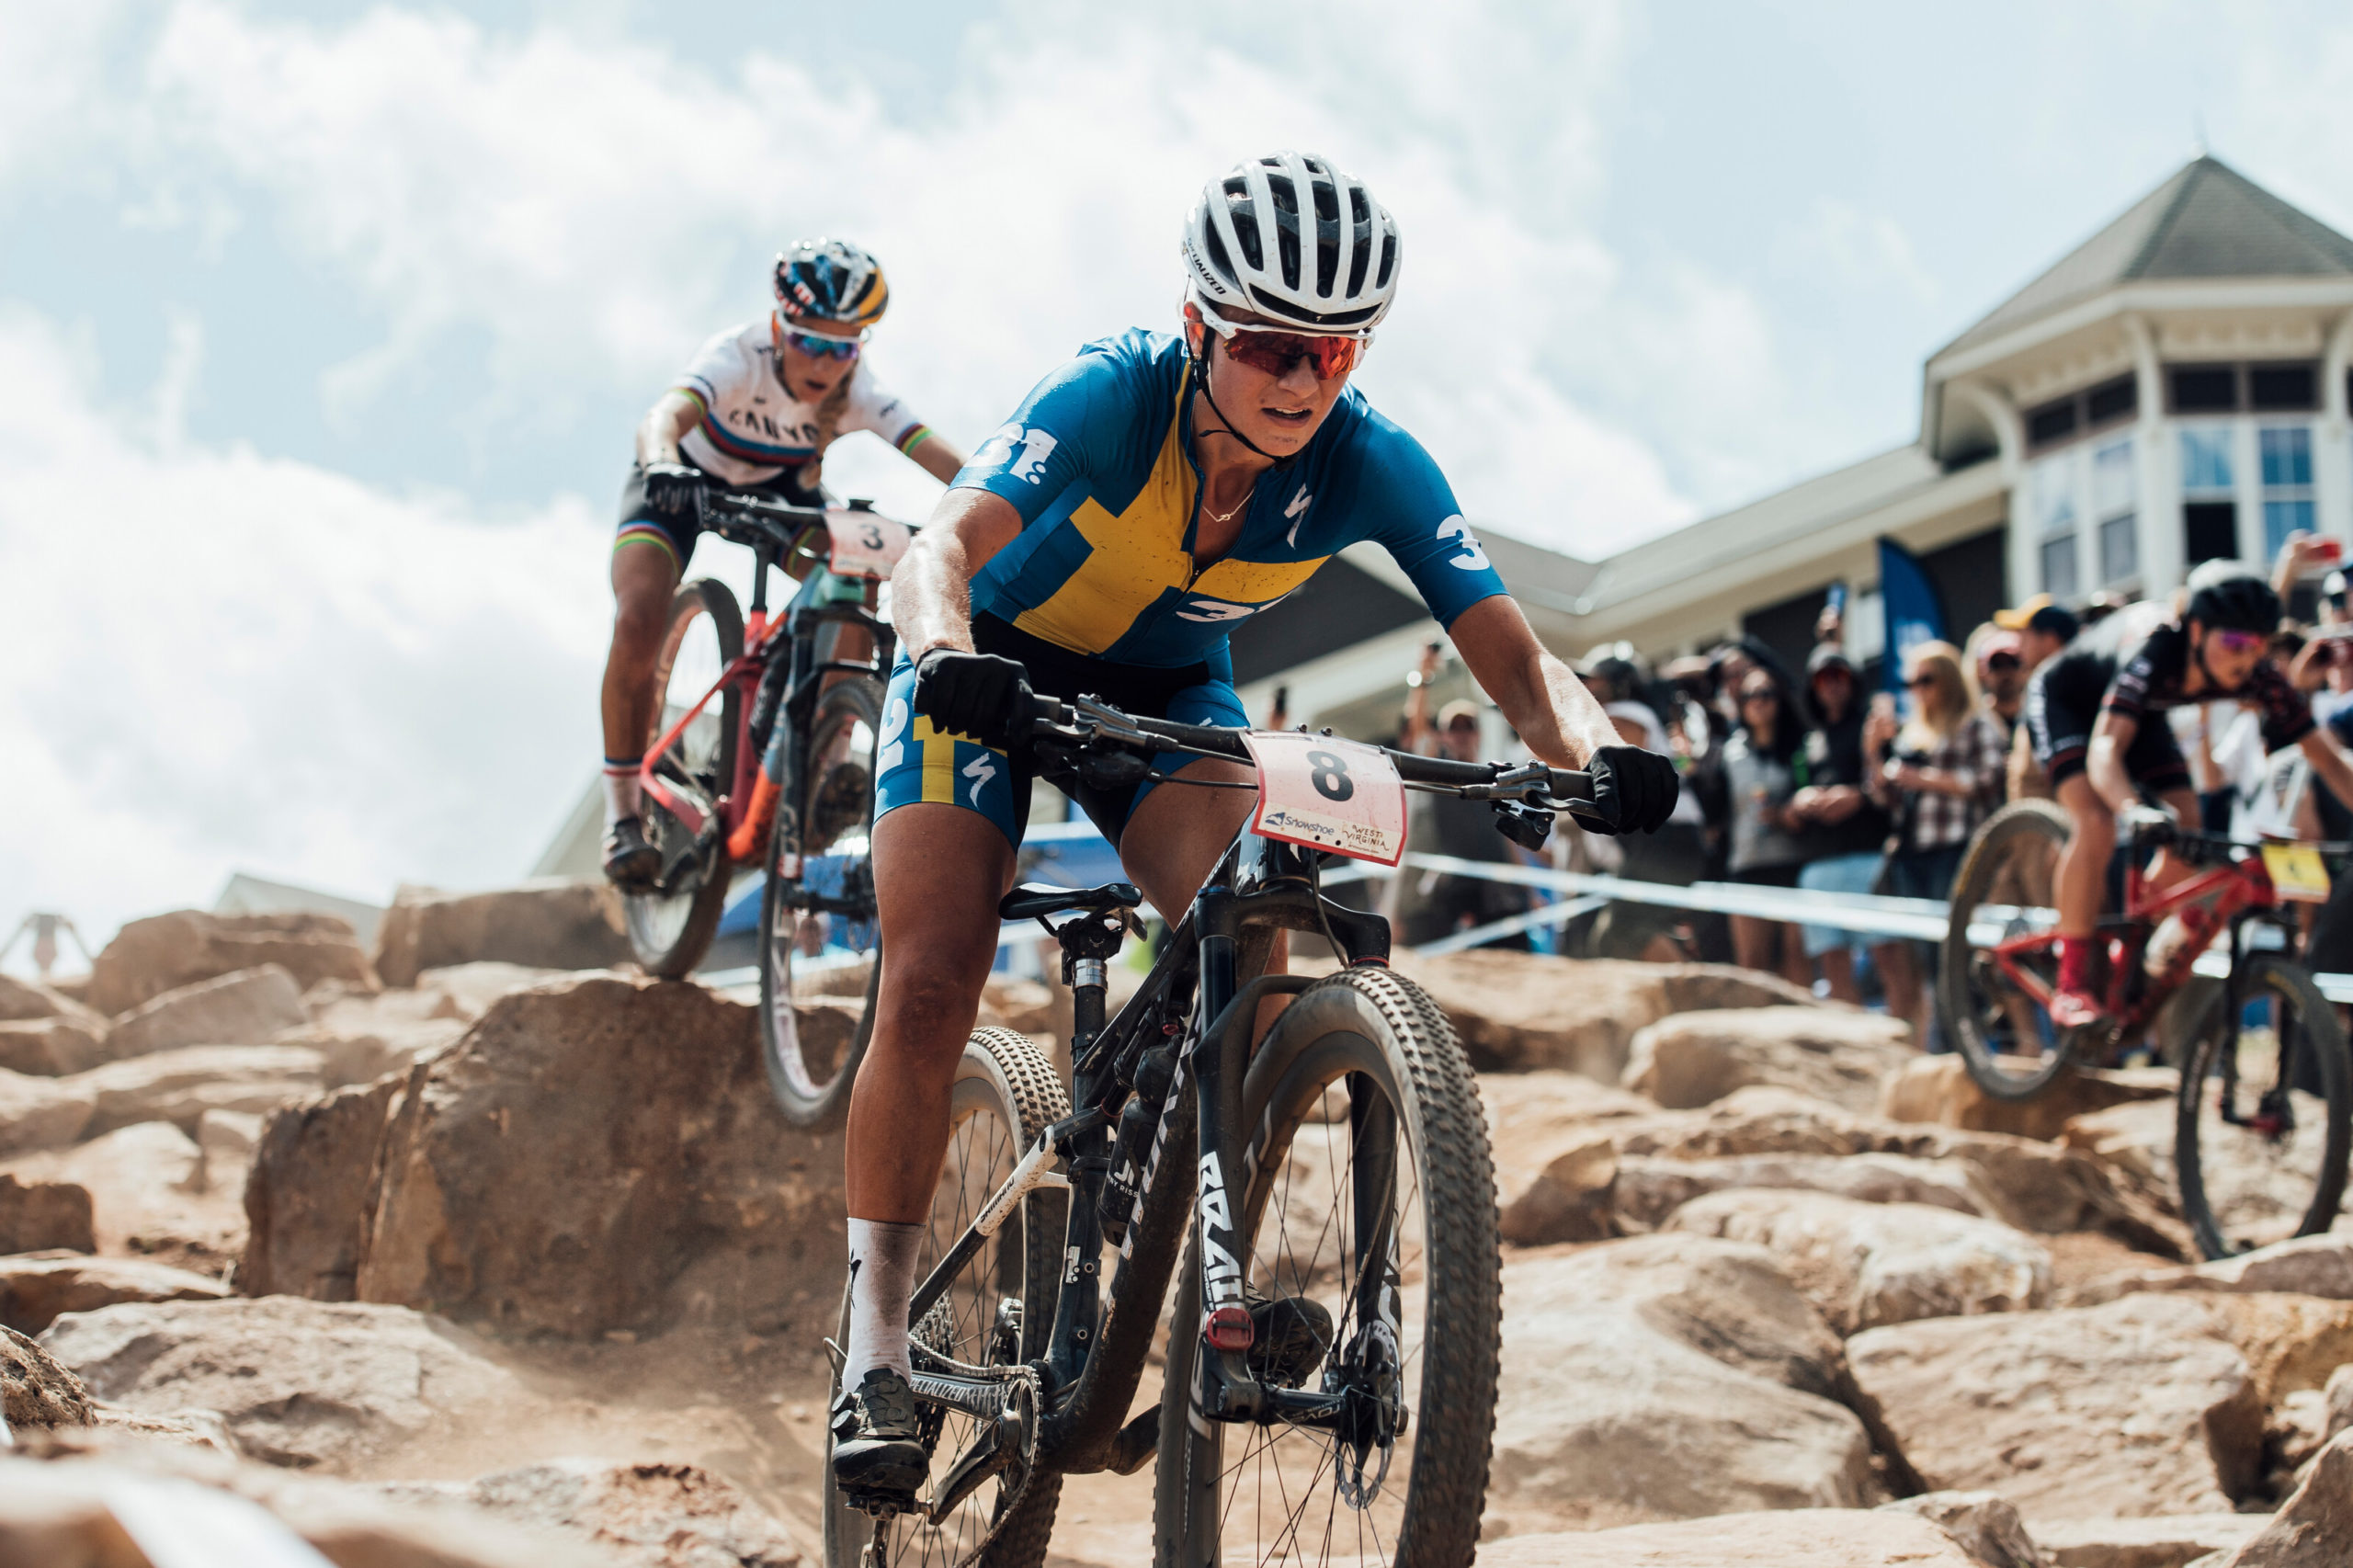 2020 UCI Mountain Bike World Cup to start in September | SPARK BIKE